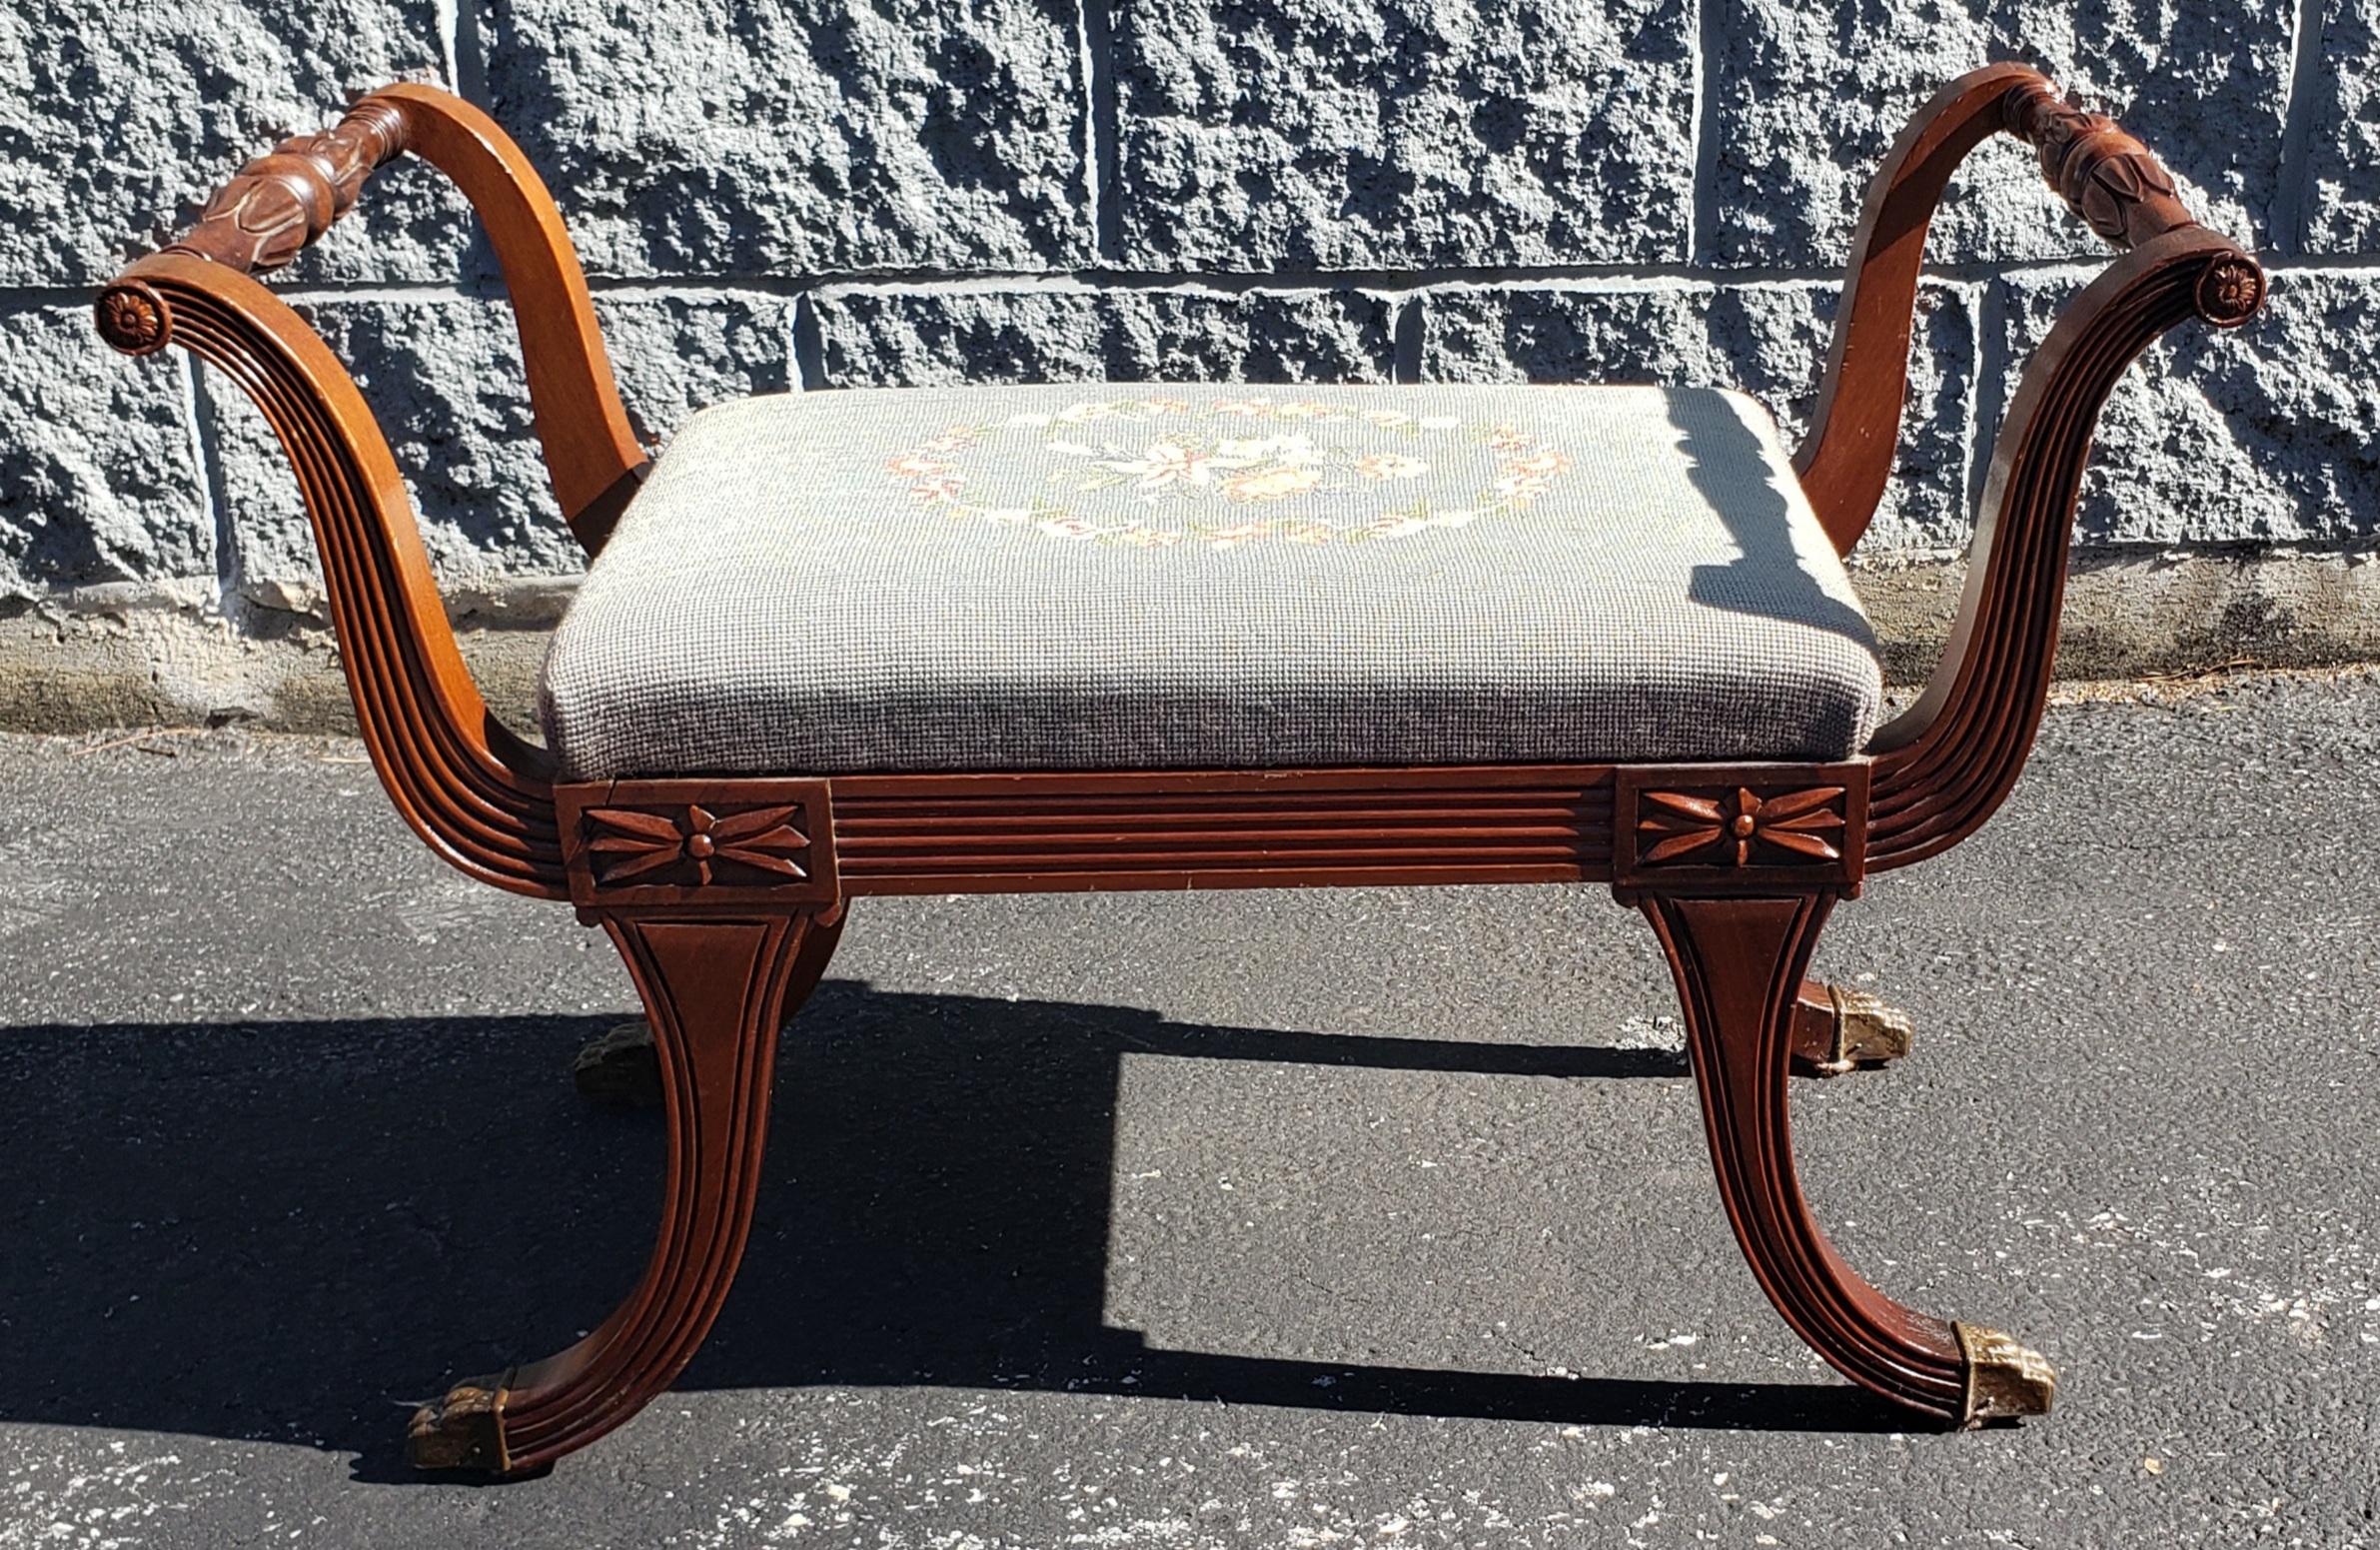 20th Century 1930s Berg Furniture Regency Mahogany Floral Needlepoint Arm Settee Bench